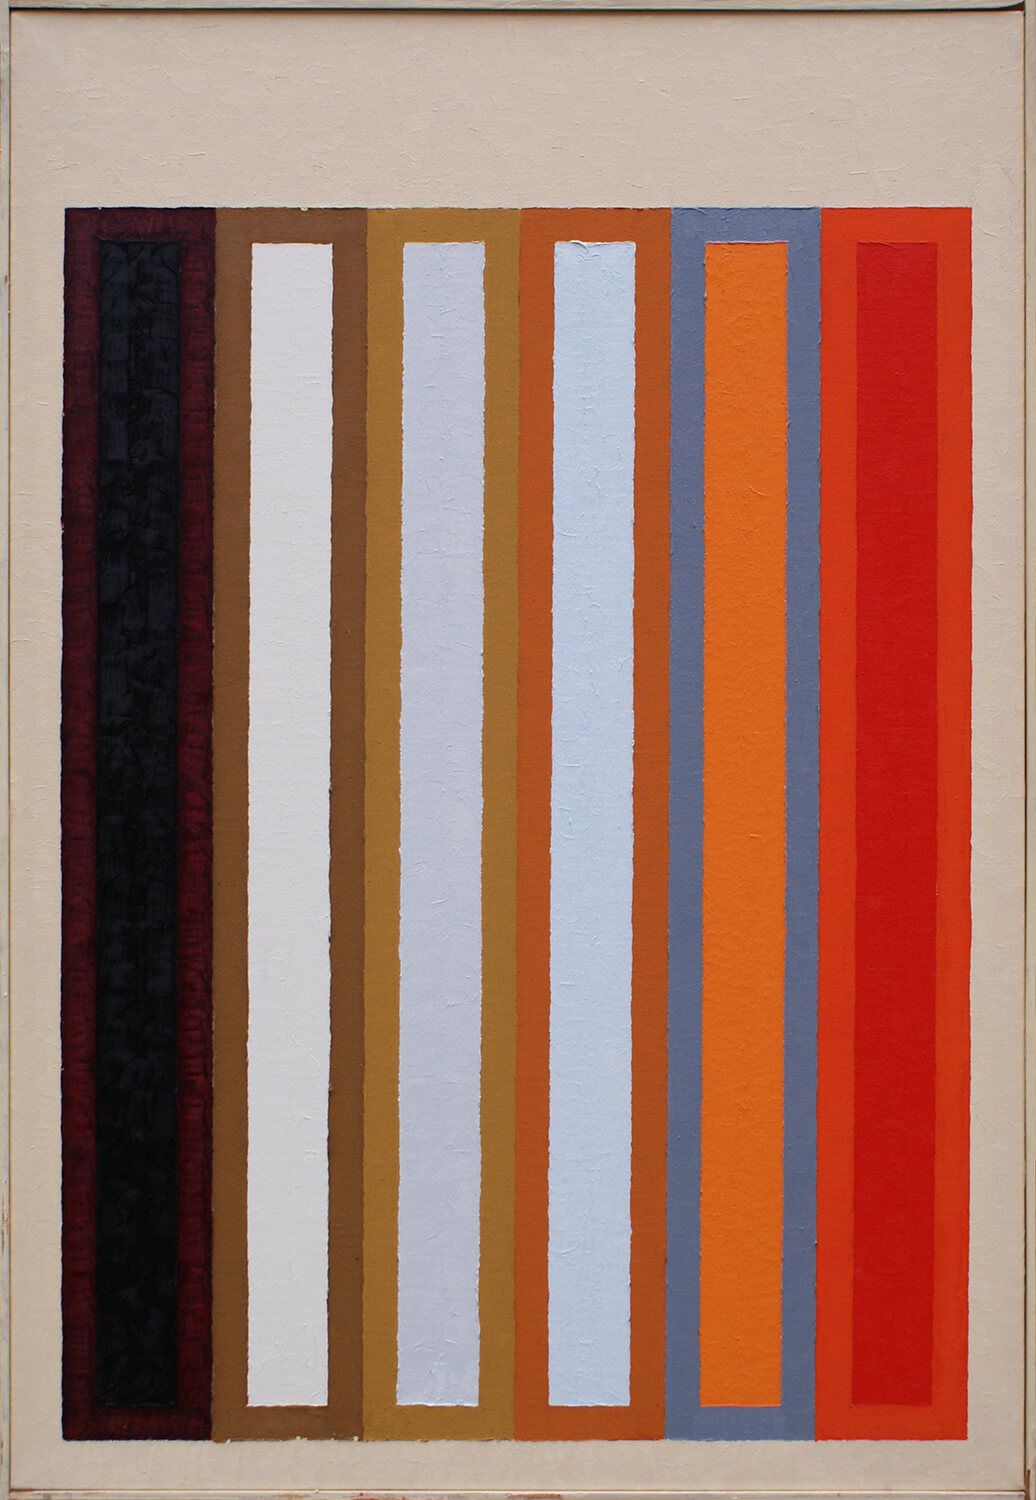 Peter Benkert, Untitled 4 (five-part series), 1977, acrylic on canvas, 90 x 60 cm